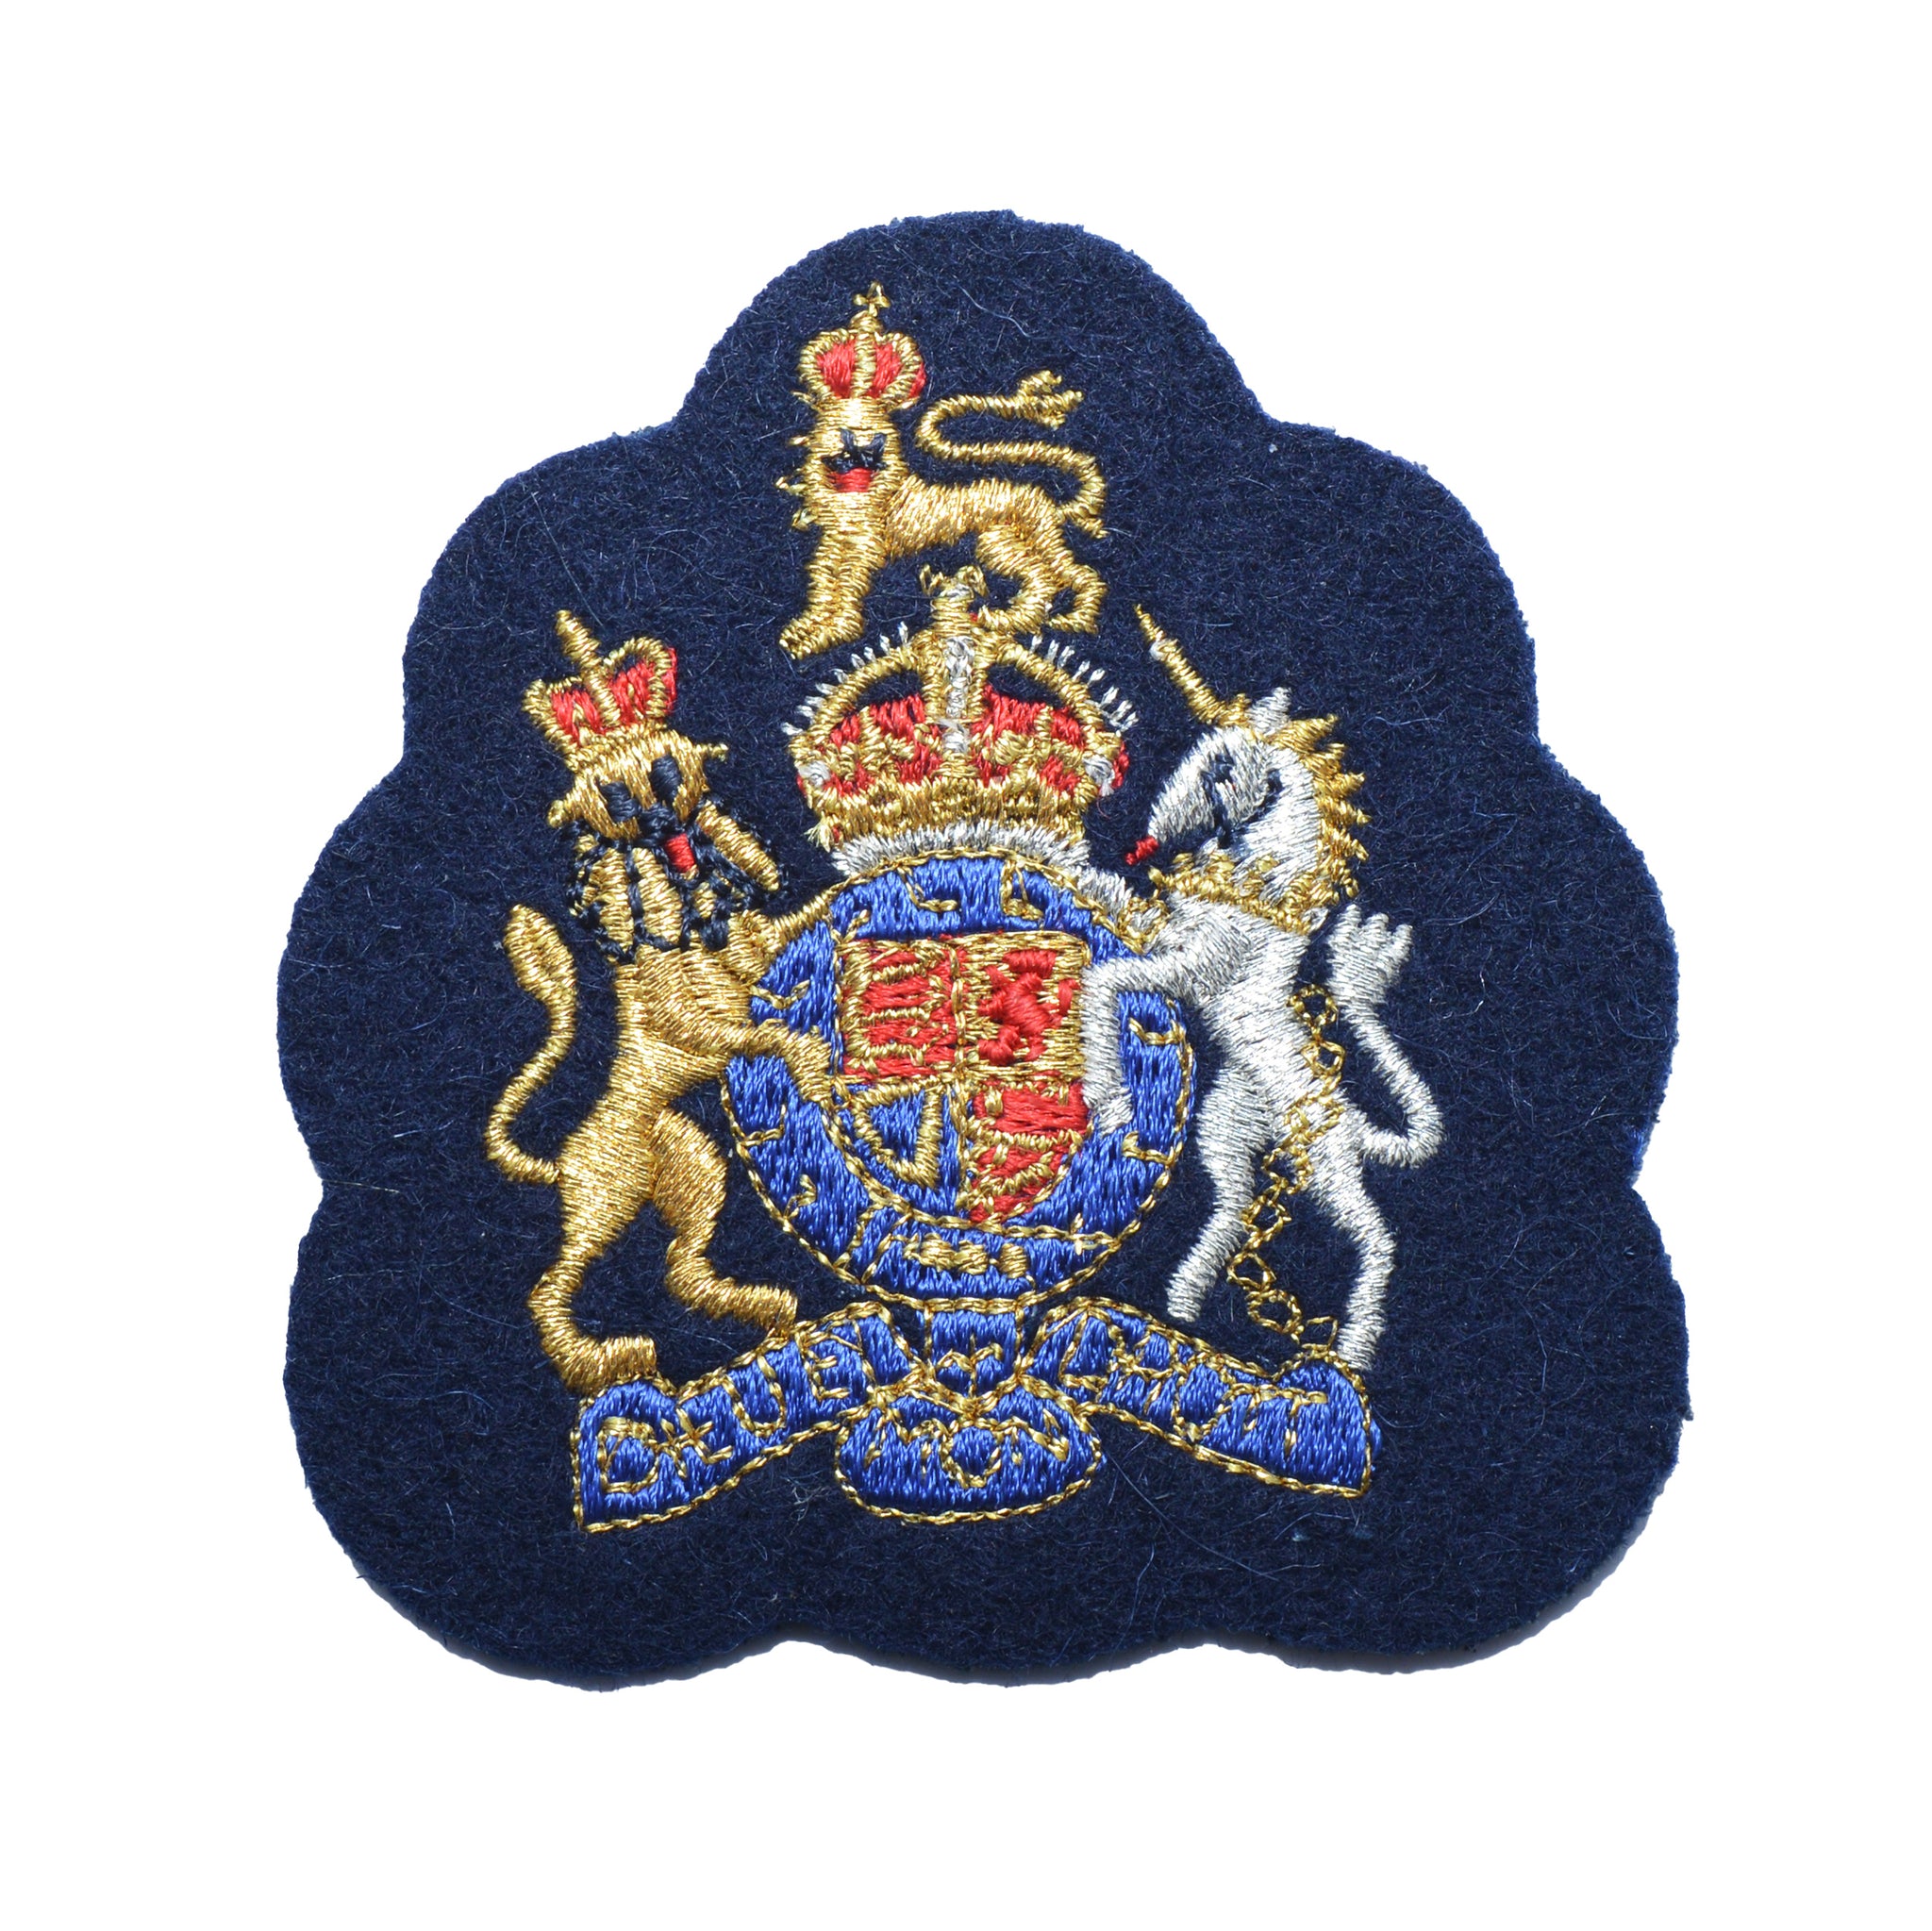 (King's Crown) Warrant Officer Class 1 (WO1) Royal Arms Rank Badge Royal Air Force (RAF)